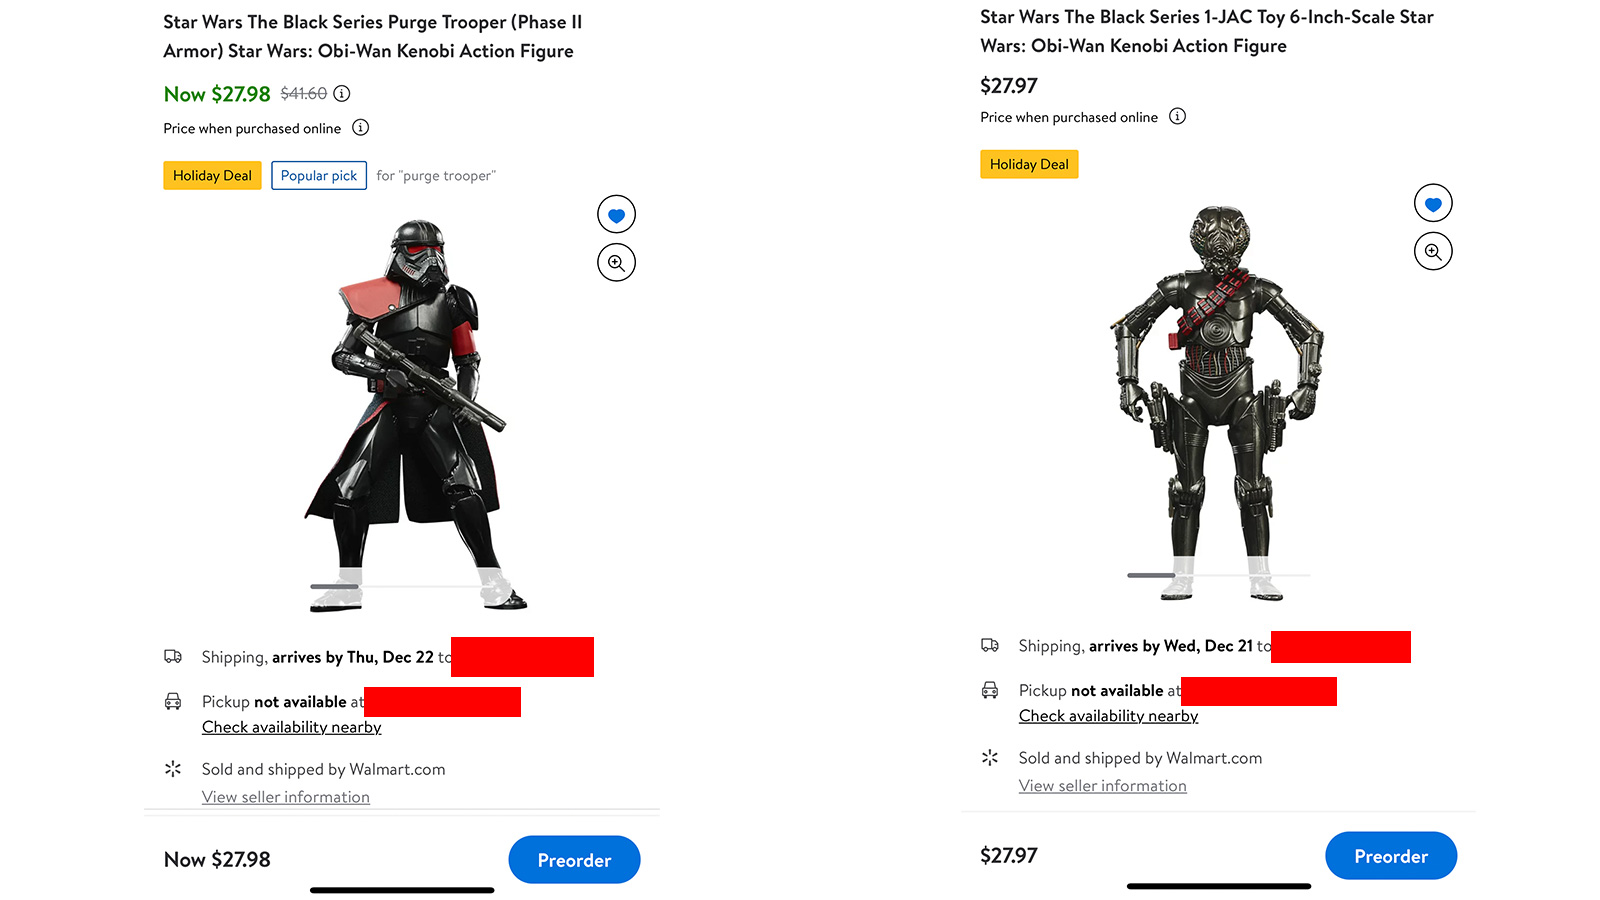 Back Up For Preorder - Walmart Exclusive TBS 6-Inch Purge Trooper (Phase II Armor) And 1-JAC - Arrives 12/22